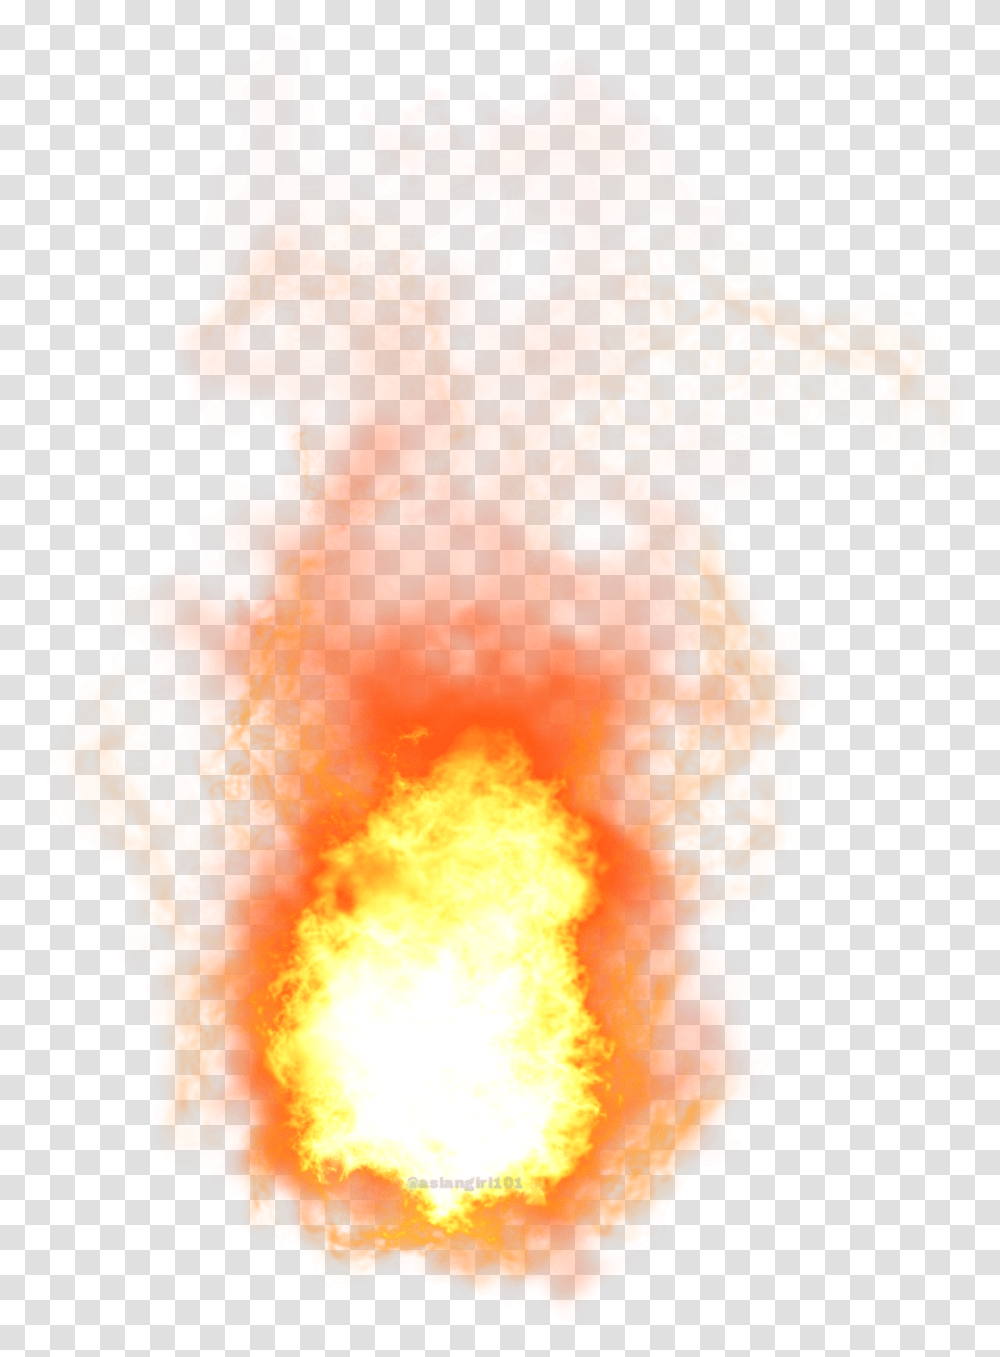 Fire Fire Gif Background, Flame, Bonfire, Performer, Fire Hydrant Transparent Png